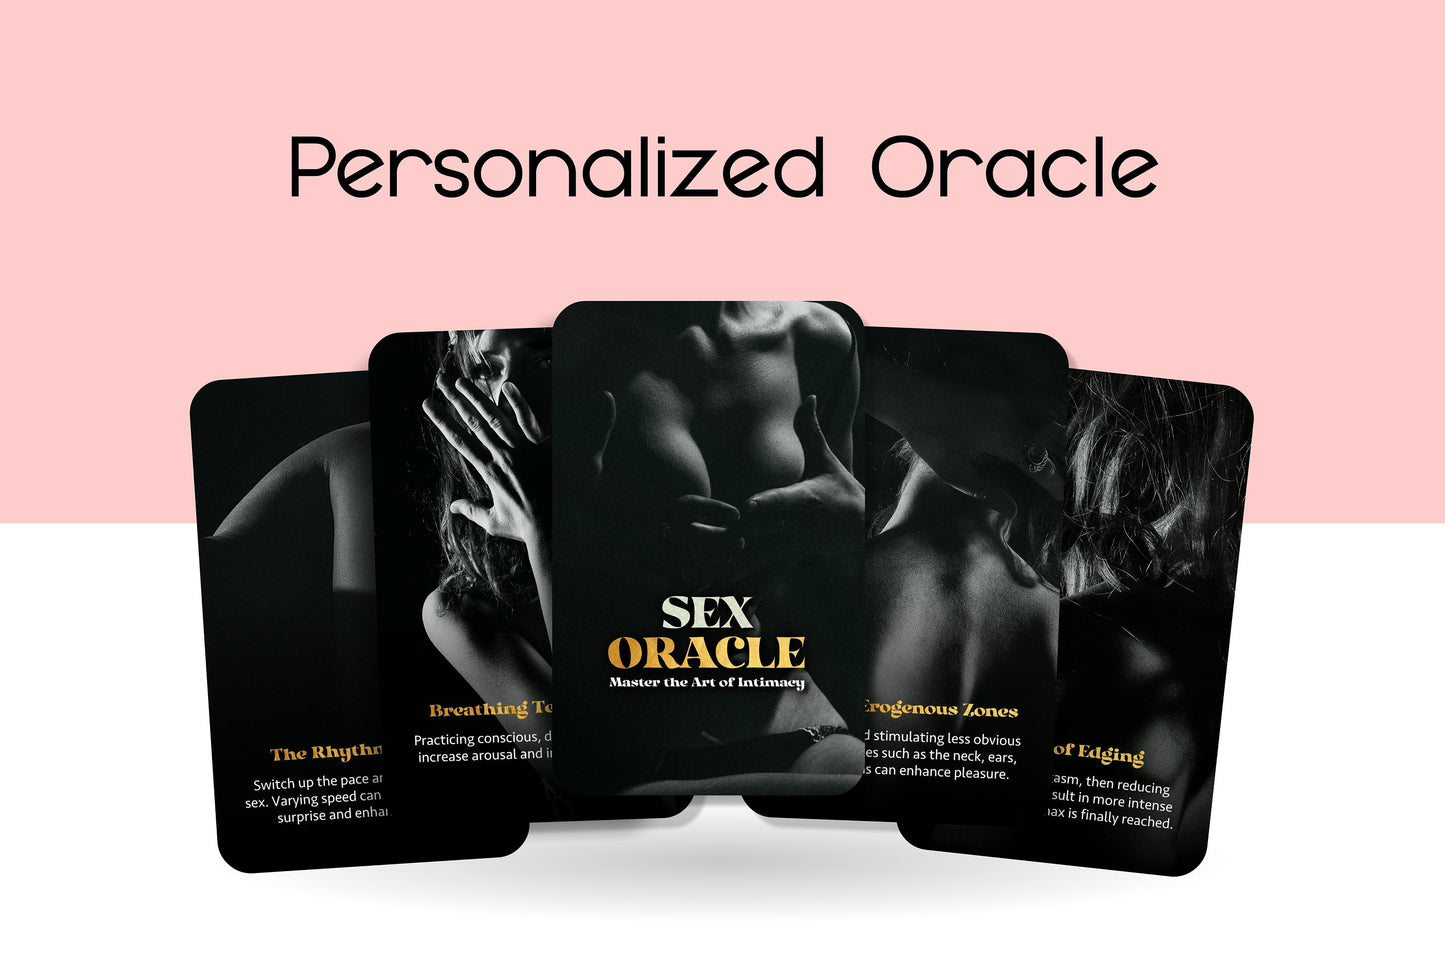 Personalised Oracle - Sex Oracle - Master the Art of Intimacy